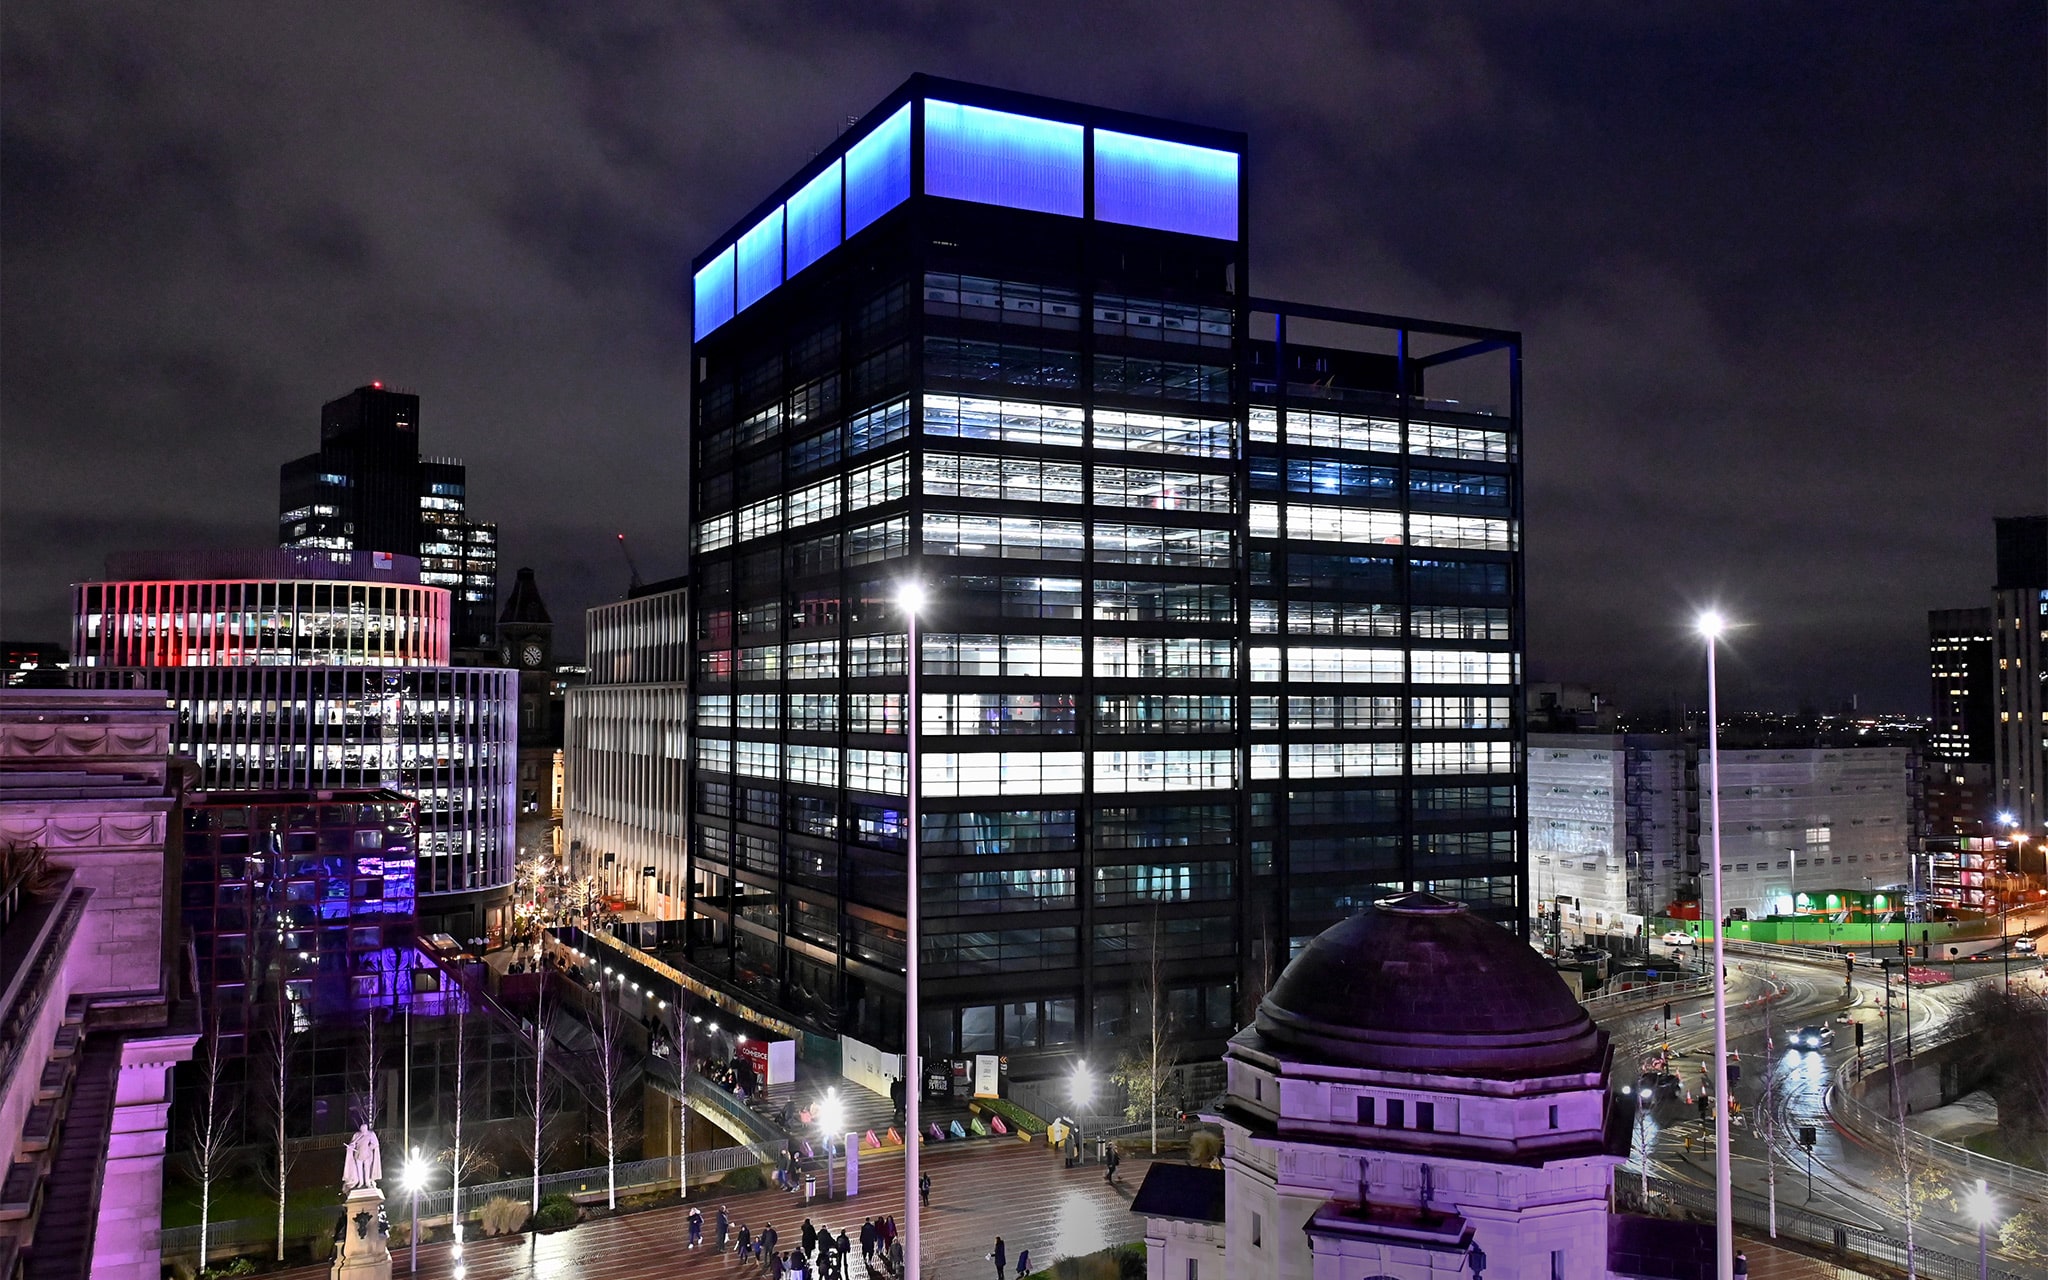 One Centenary Way, Paradise Birmingham with the glass lantern lit up at night.